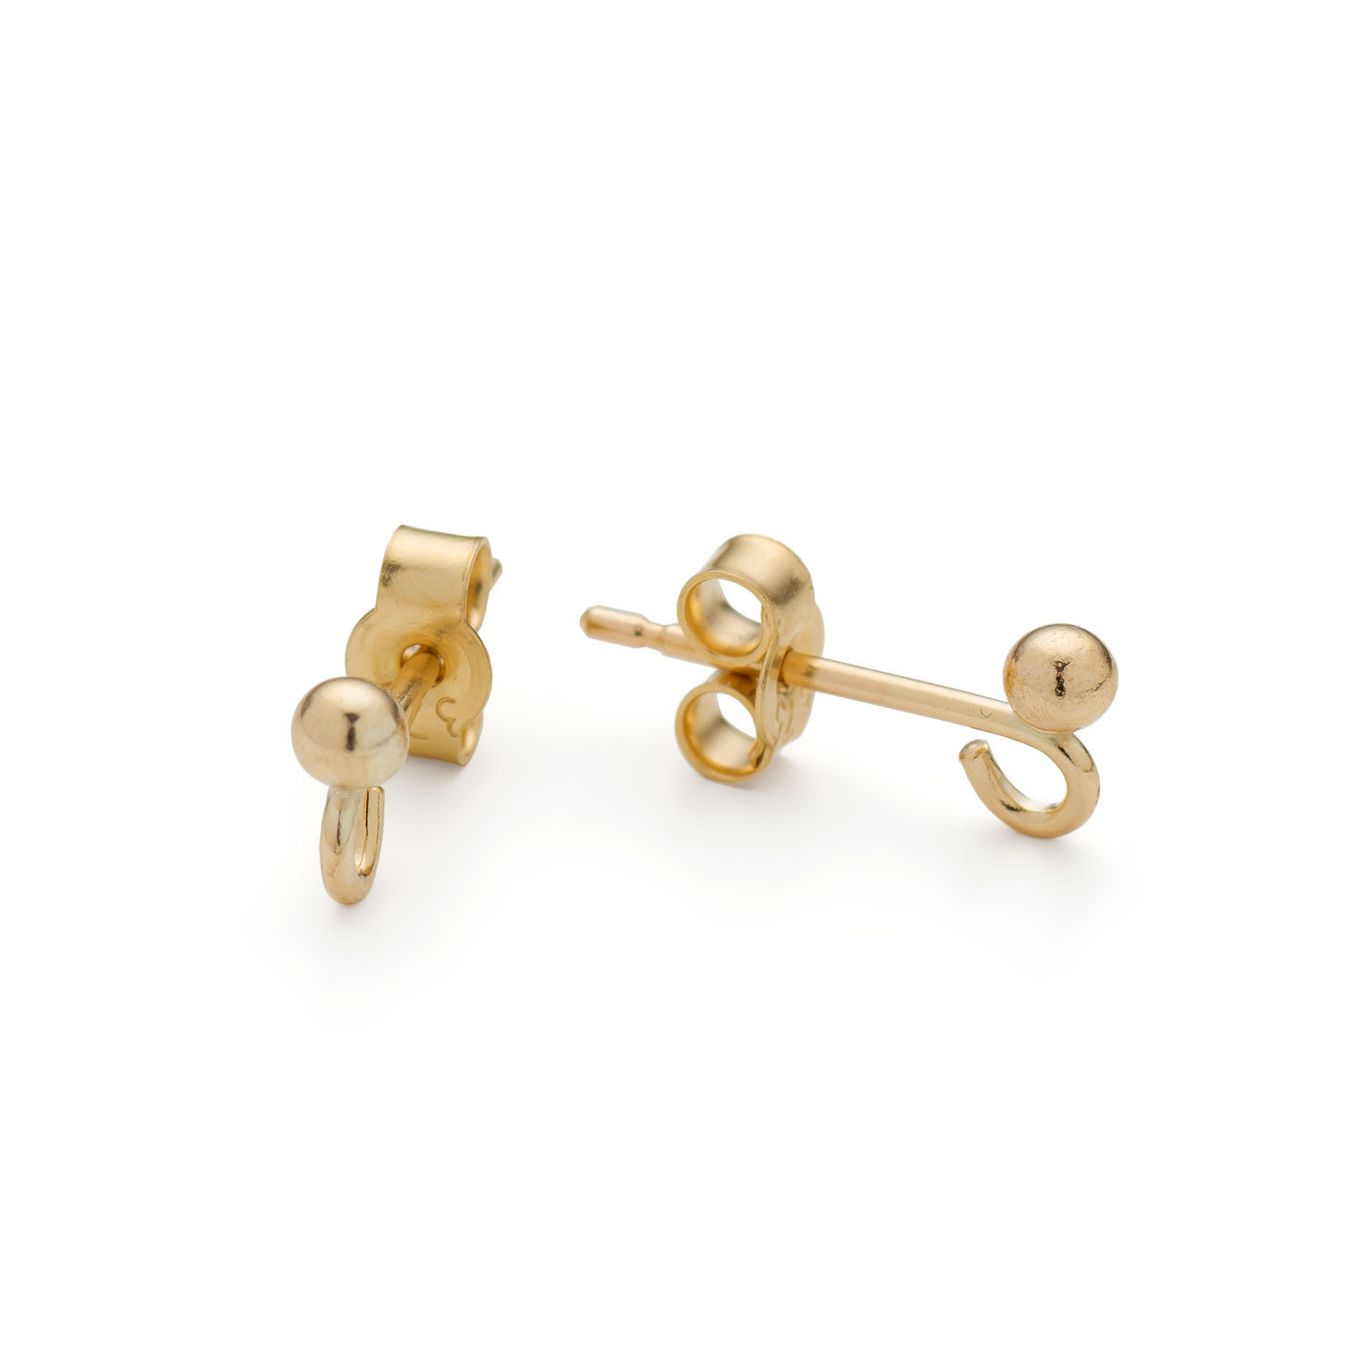 9ct Gold French Earstuds with Ball & Loop (Pair)